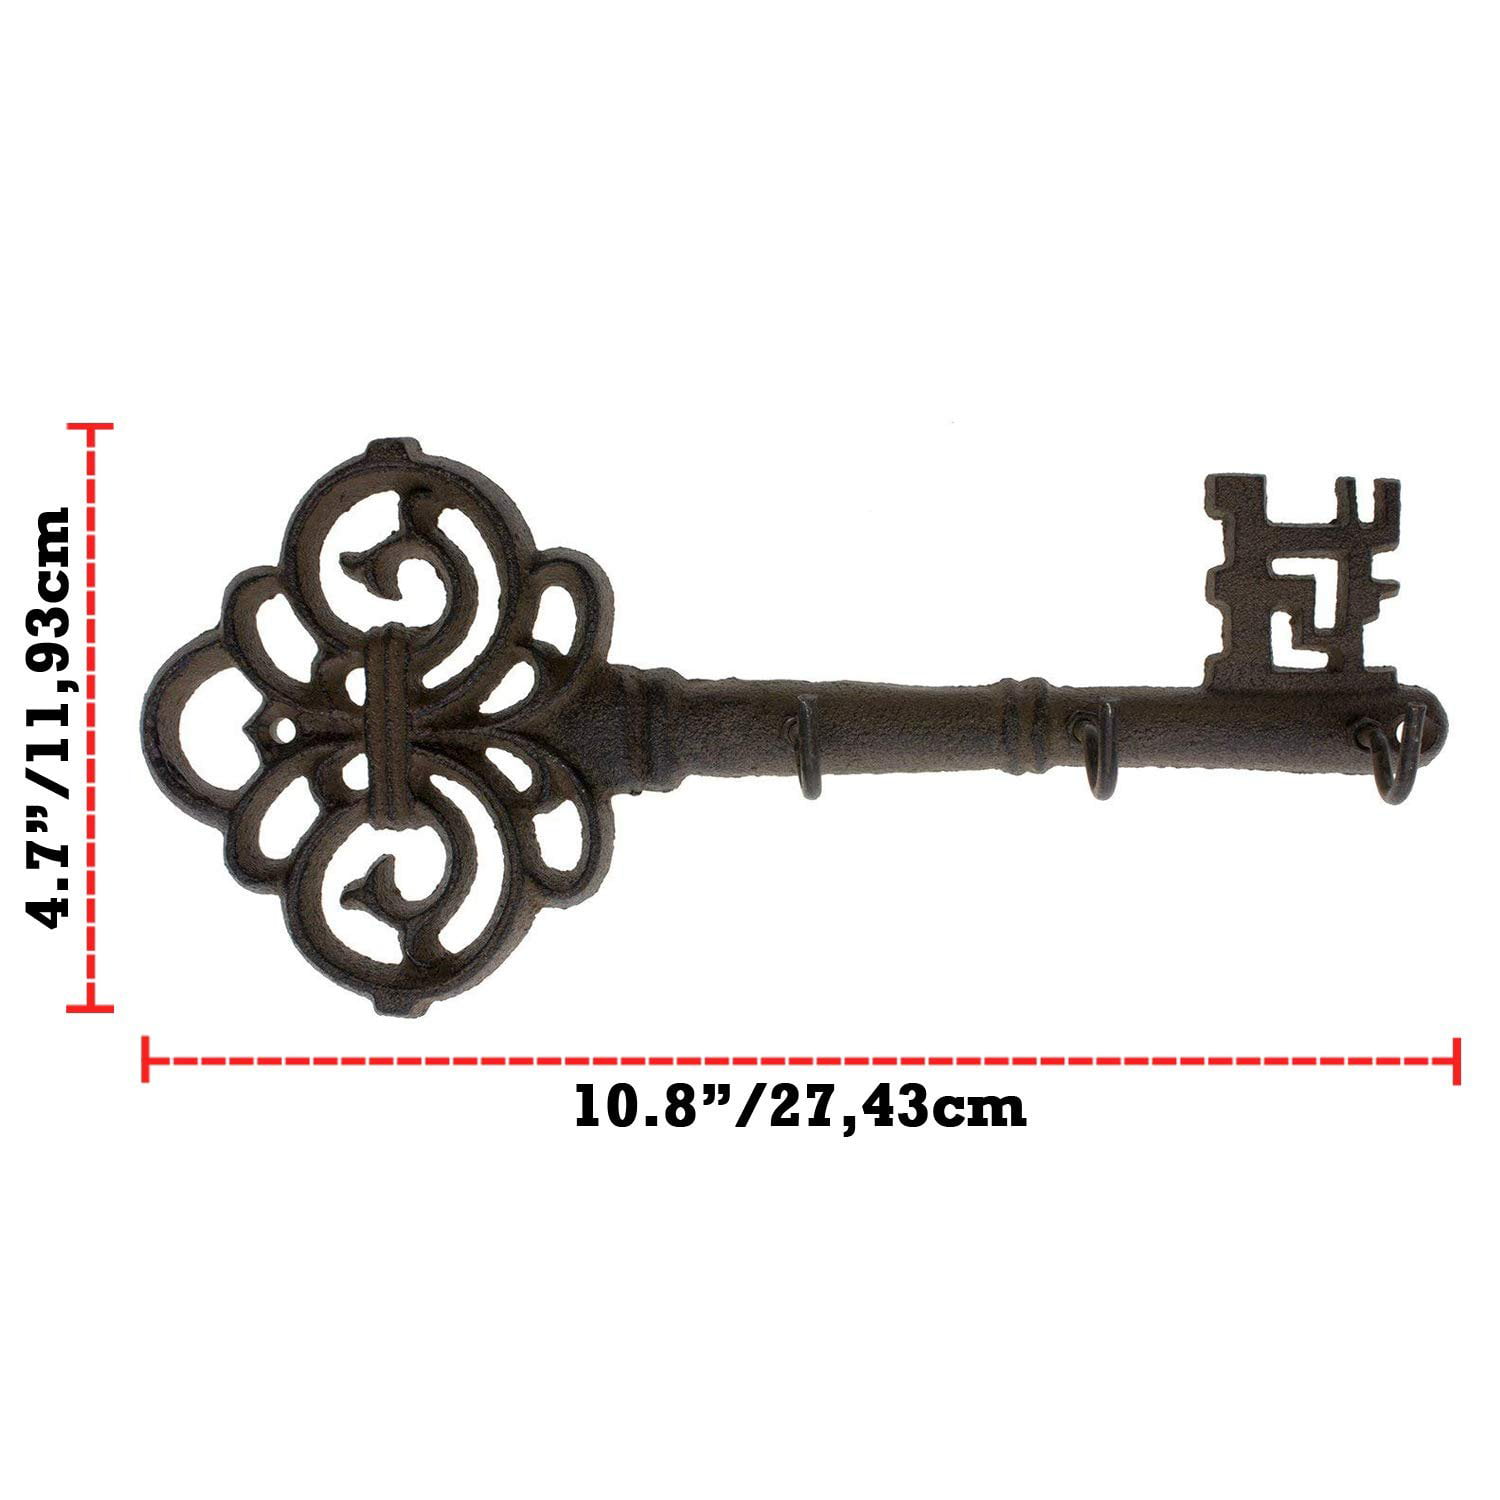 Keys Towels Comfify Cast Iron Wall Hanger – Vintage Design with 5 Hooks e... 